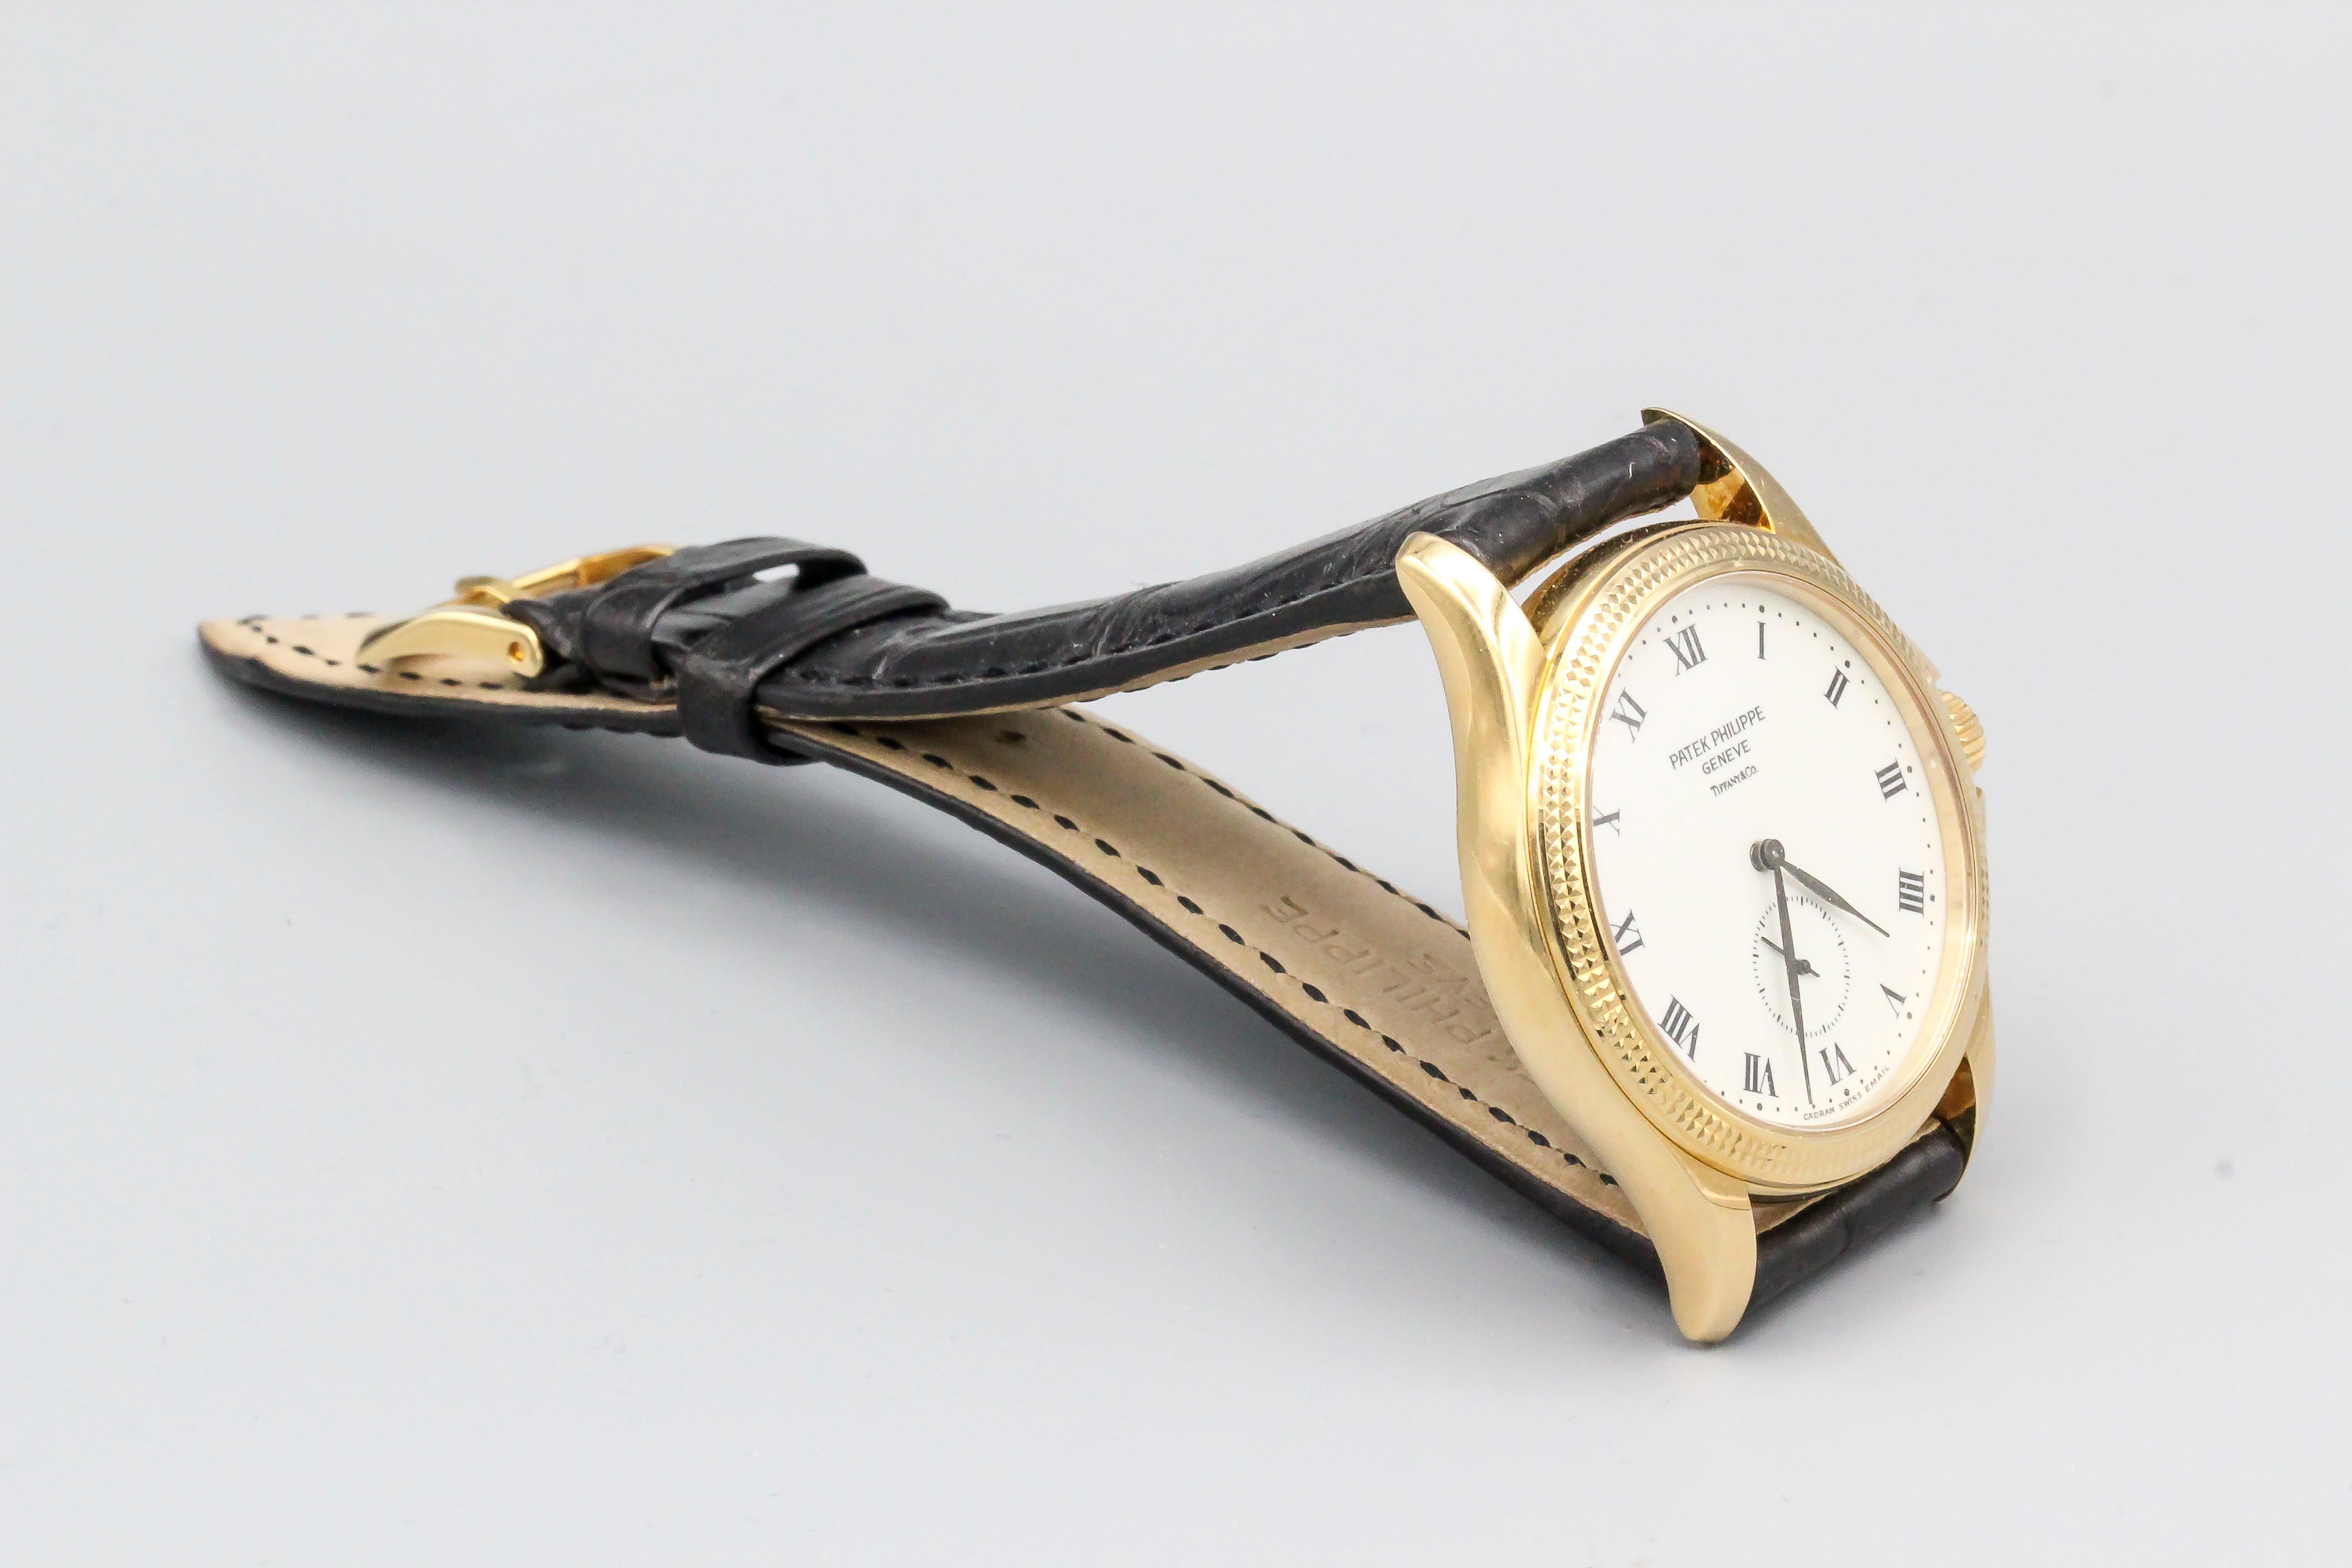 Fine 18K yellow gold wrist watch by Patek Philippe & Co. for Tiffany & Co., reference # 5115. It features a double-signed enamel dial, 18k gold case with hobnail bezel, 18k gold tang buckle, genuine new Patek Philippe coffee brown strapstrap, and a